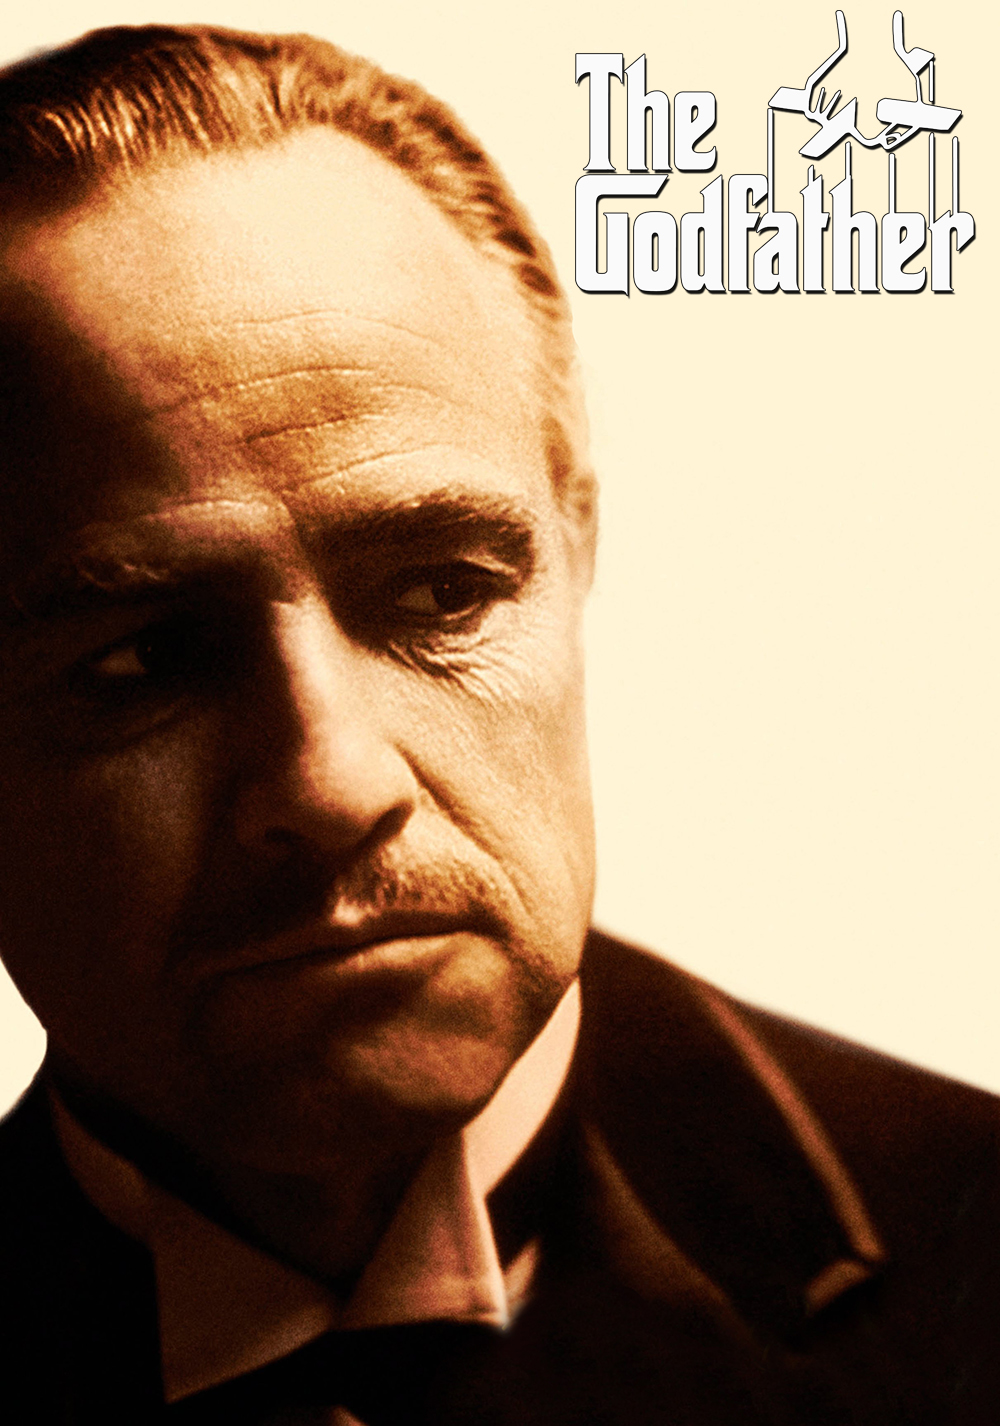 The Godfather Picture